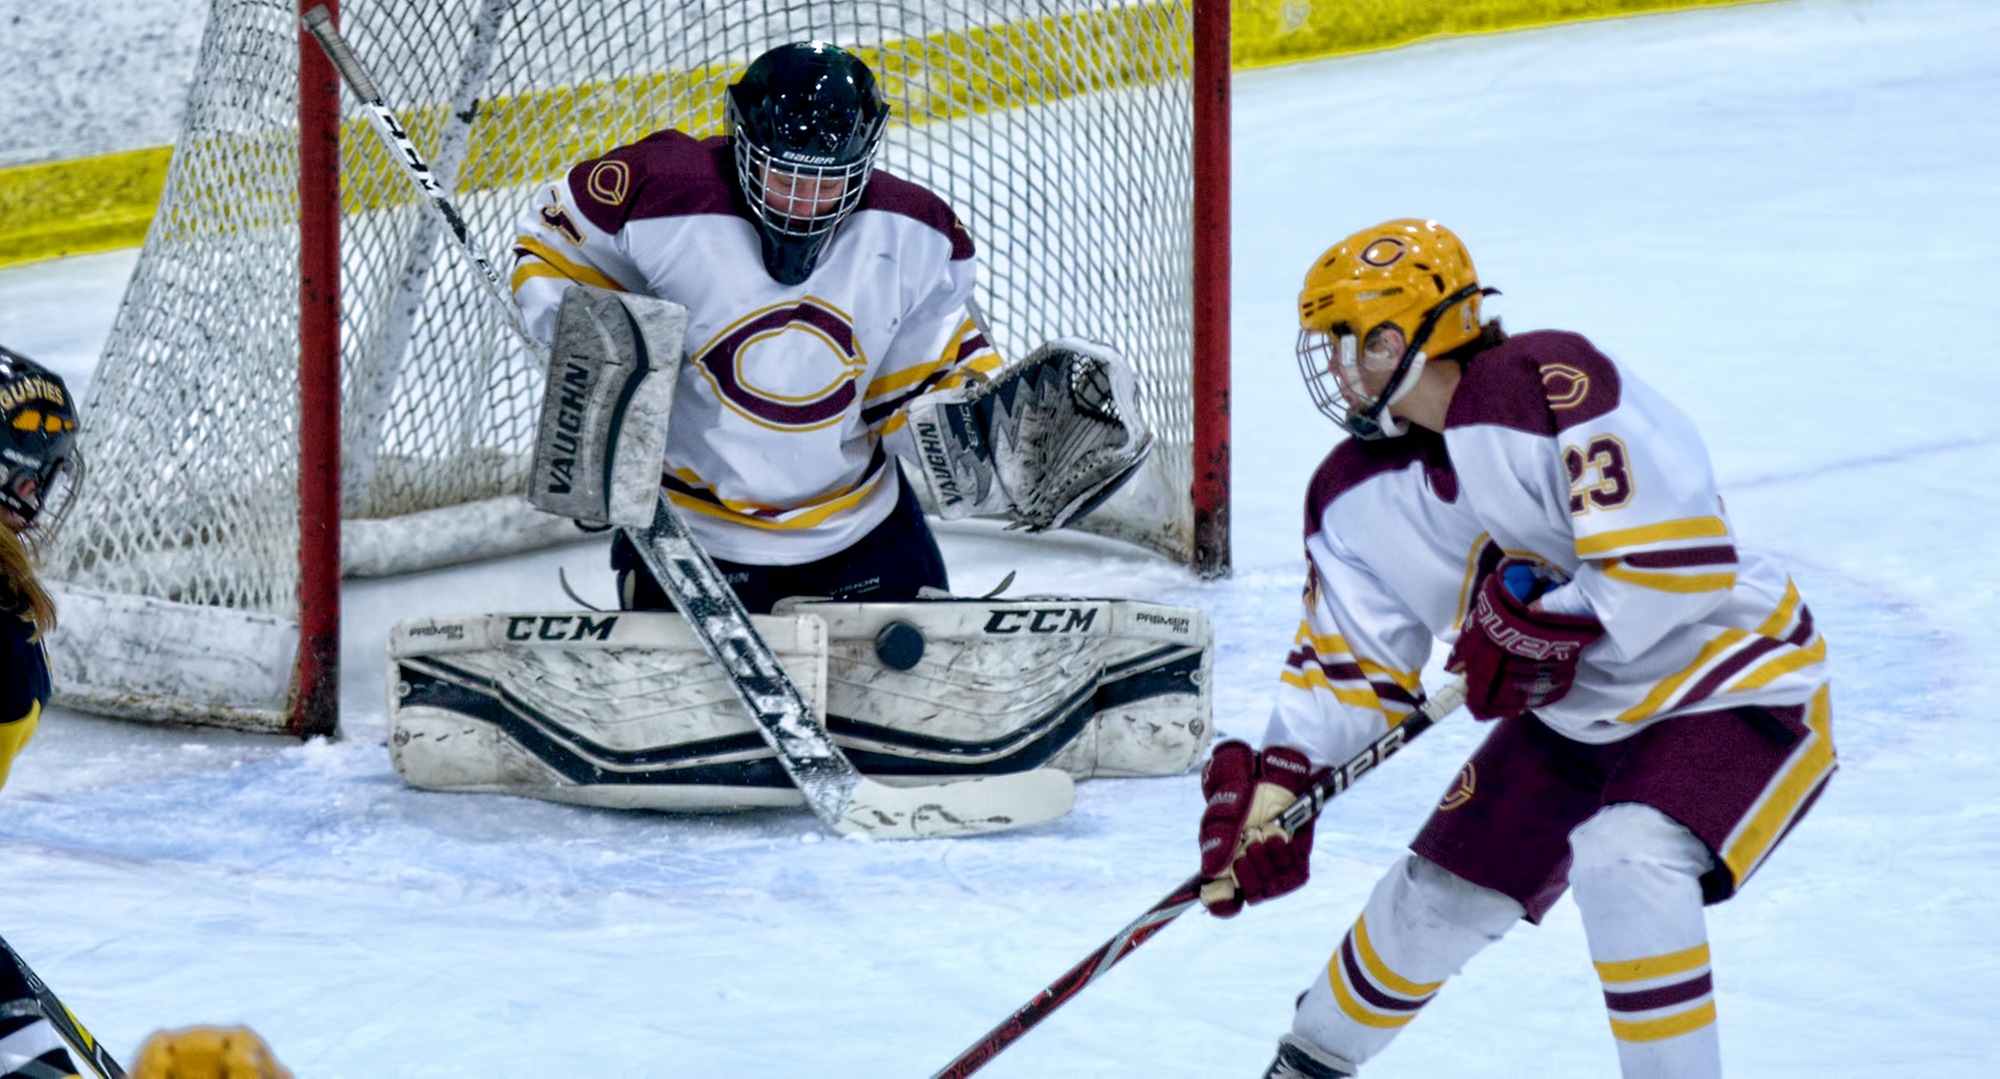 Goalie Amy Jost stopped the final 33 shots she faced to help Concordia earn a 2-2 OT tie at Augsburg and gain a spot in the MIAC playoffs.